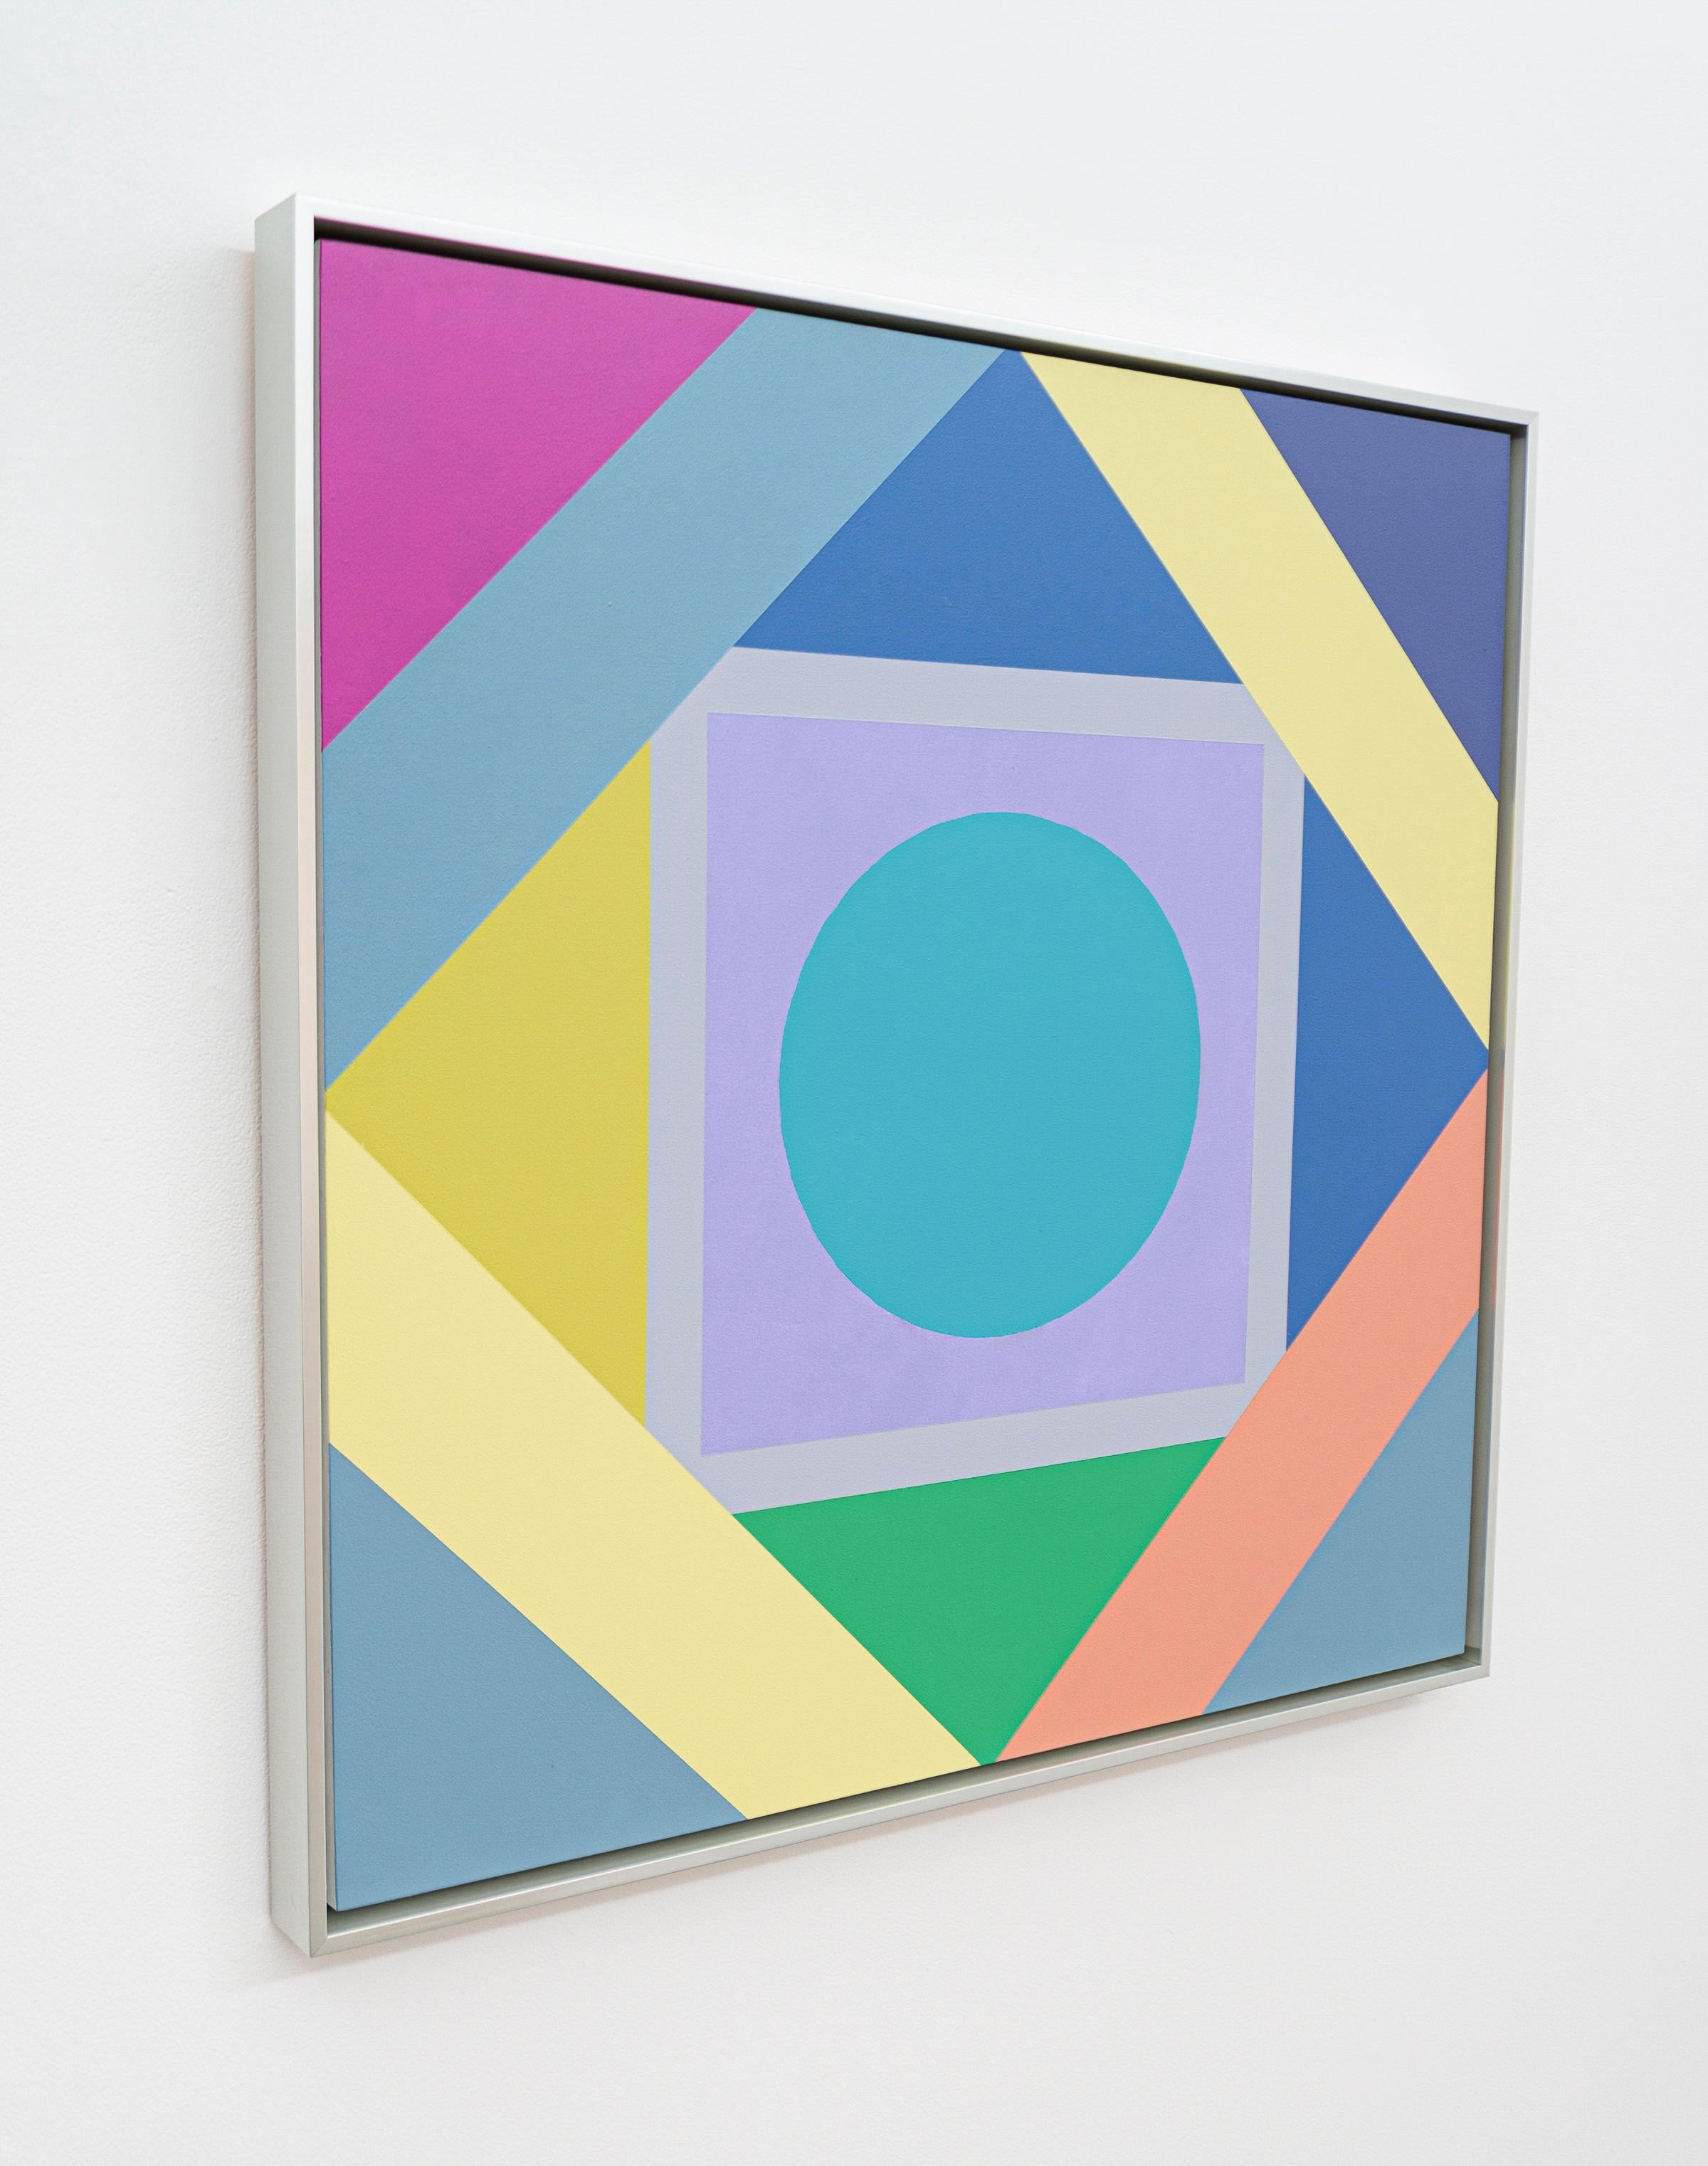 A bright turquoise-blue ‘sun’ draws the viewer’s eye into the center of this beautiful new composition by Burton Kramer. A modernist, Kramer’s expressive work plays with geometric shapes enhanced by a lively colour palette. Turquoise, pink, purple,